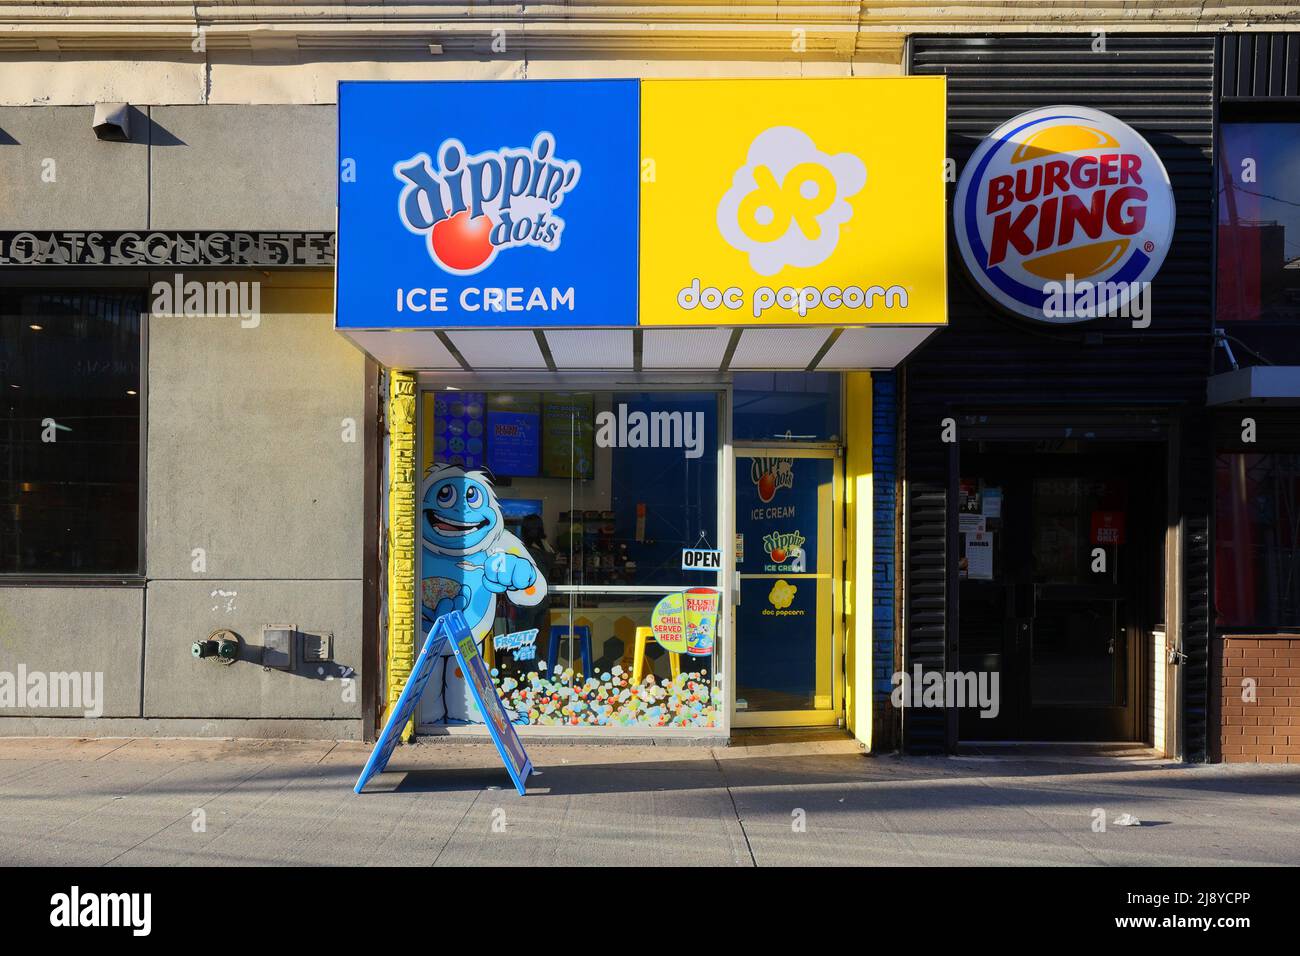 https://c8.alamy.com/comp/2J8YCPP/dippin-dots-doc-popcorn-415-fulton-st-brooklyn-new-york-nyc-storefront-photo-of-an-ice-cream-fast-food-chain-store-franchise-2J8YCPP.jpg